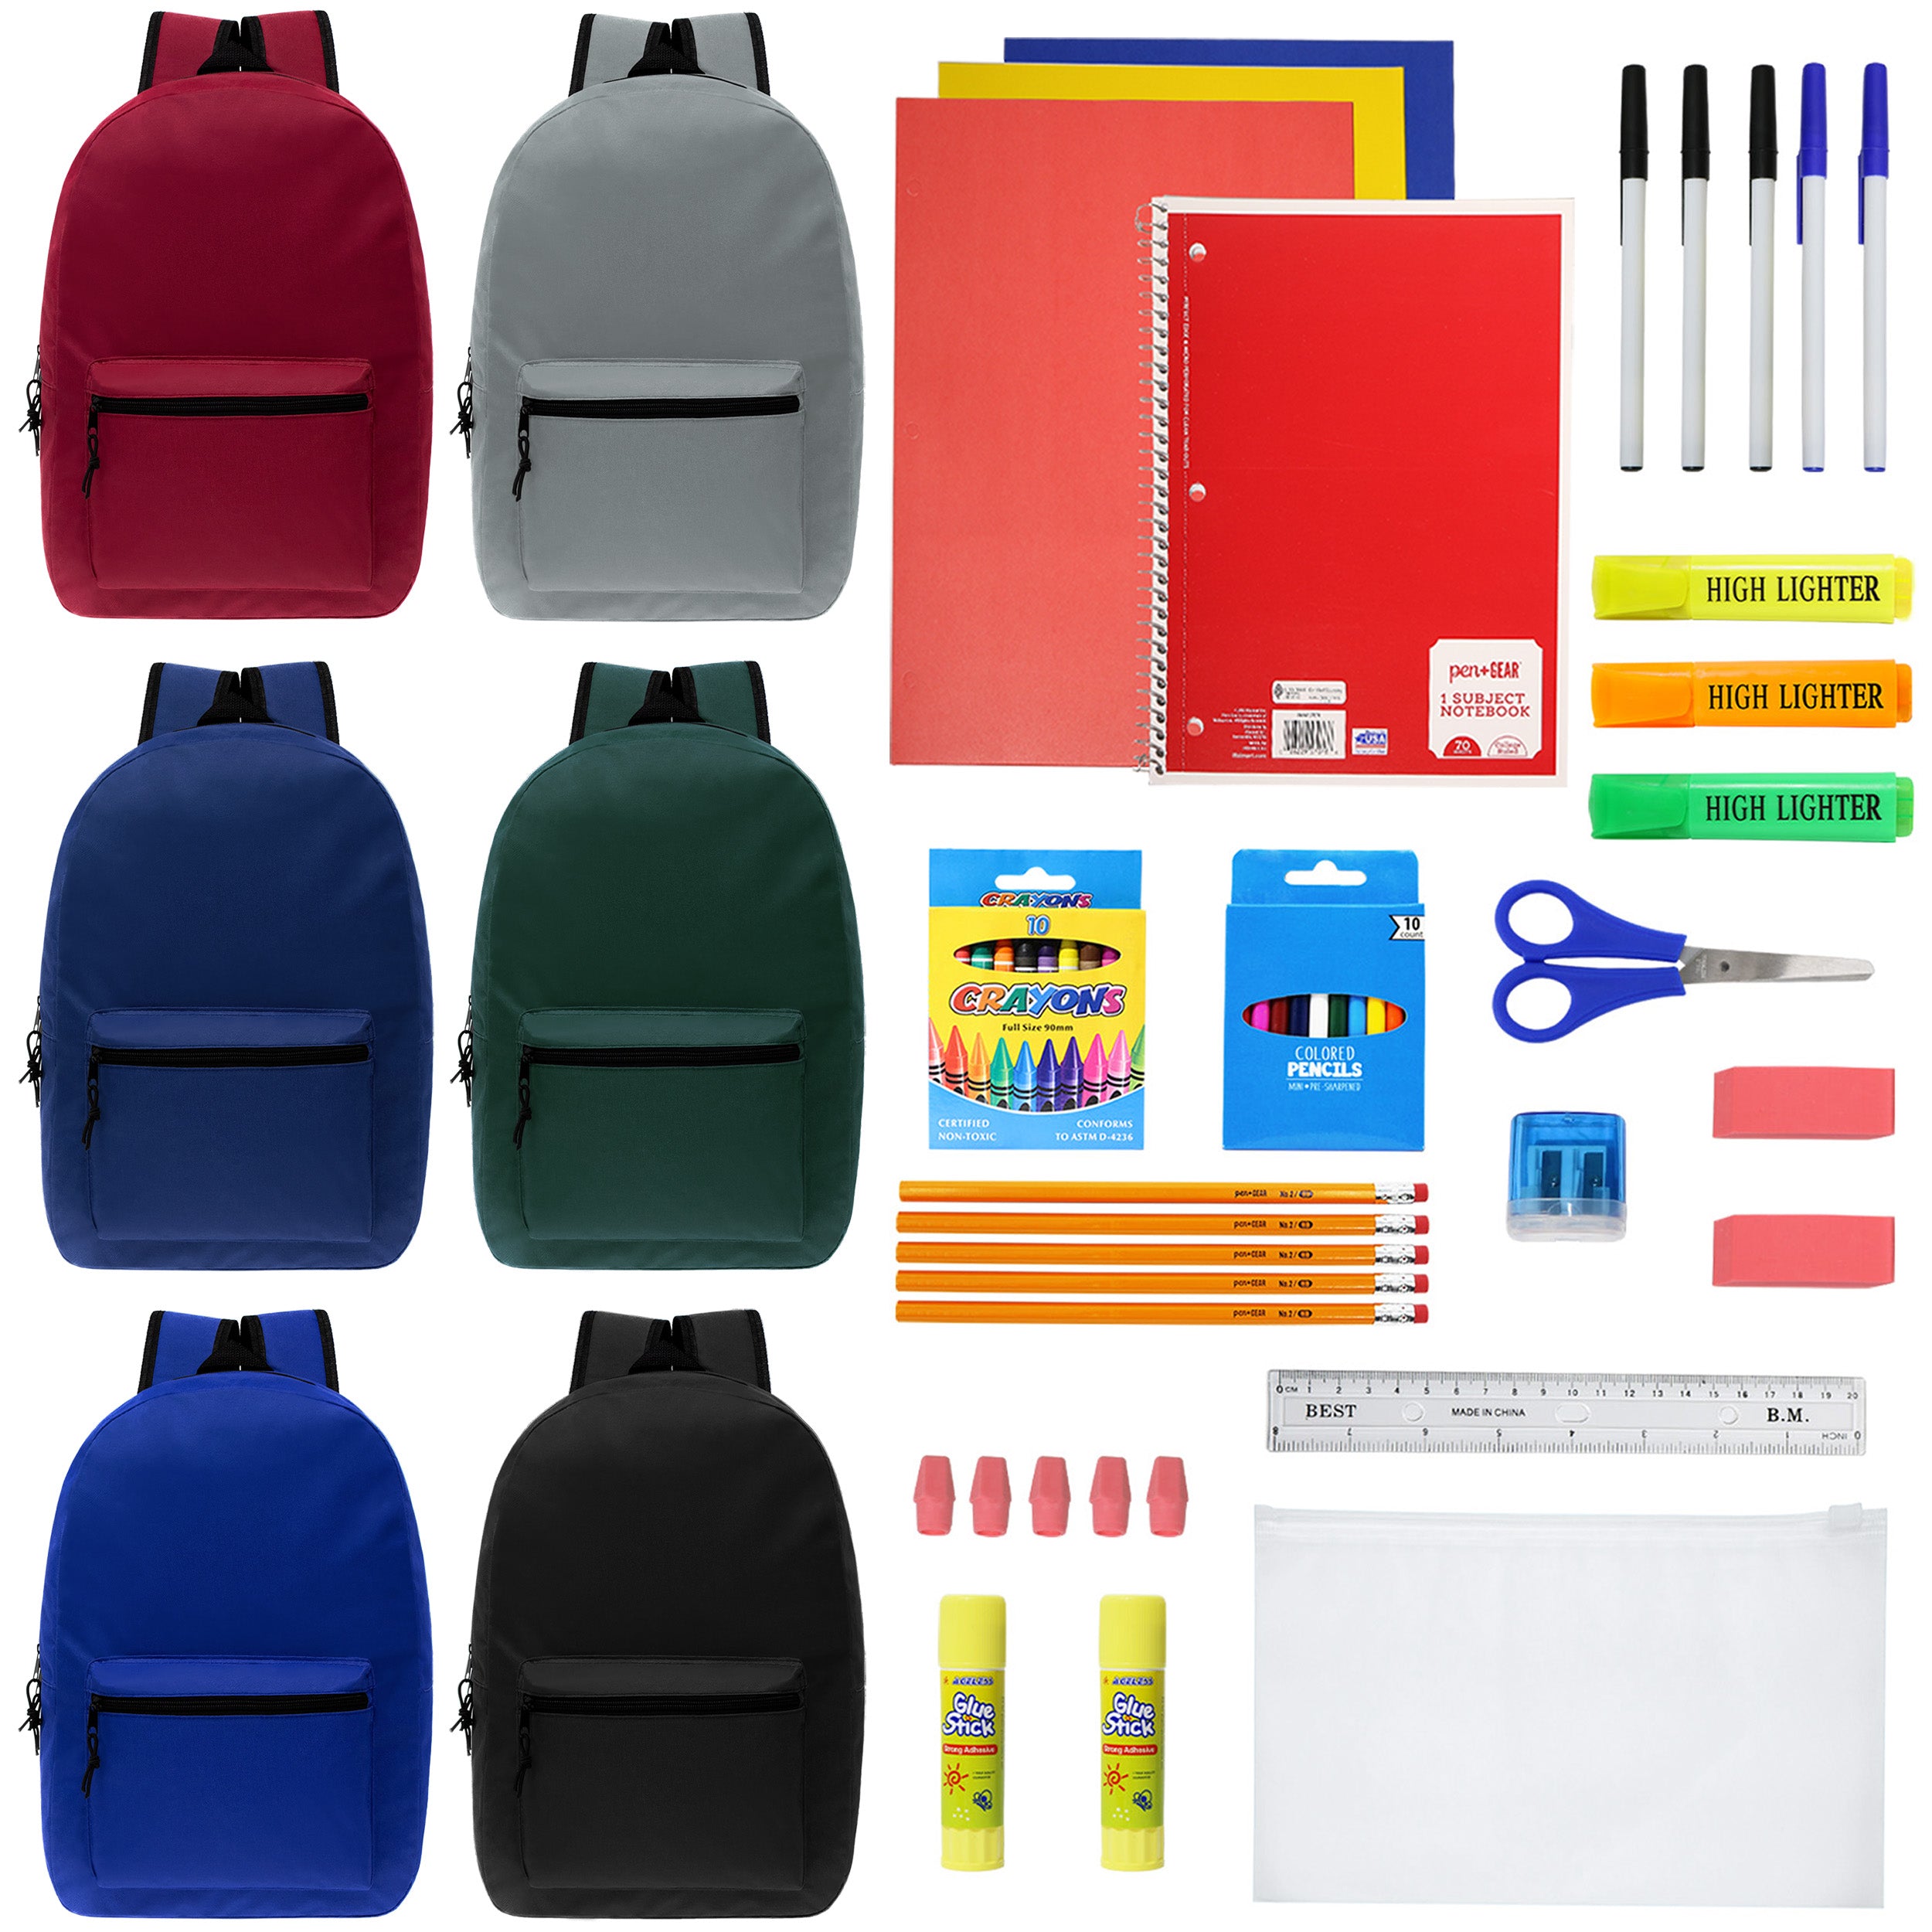 50 Piece Wholesale Basic School Supply Kit With 17" Backpack - Bulk Case of 12 Backpacks and Kits